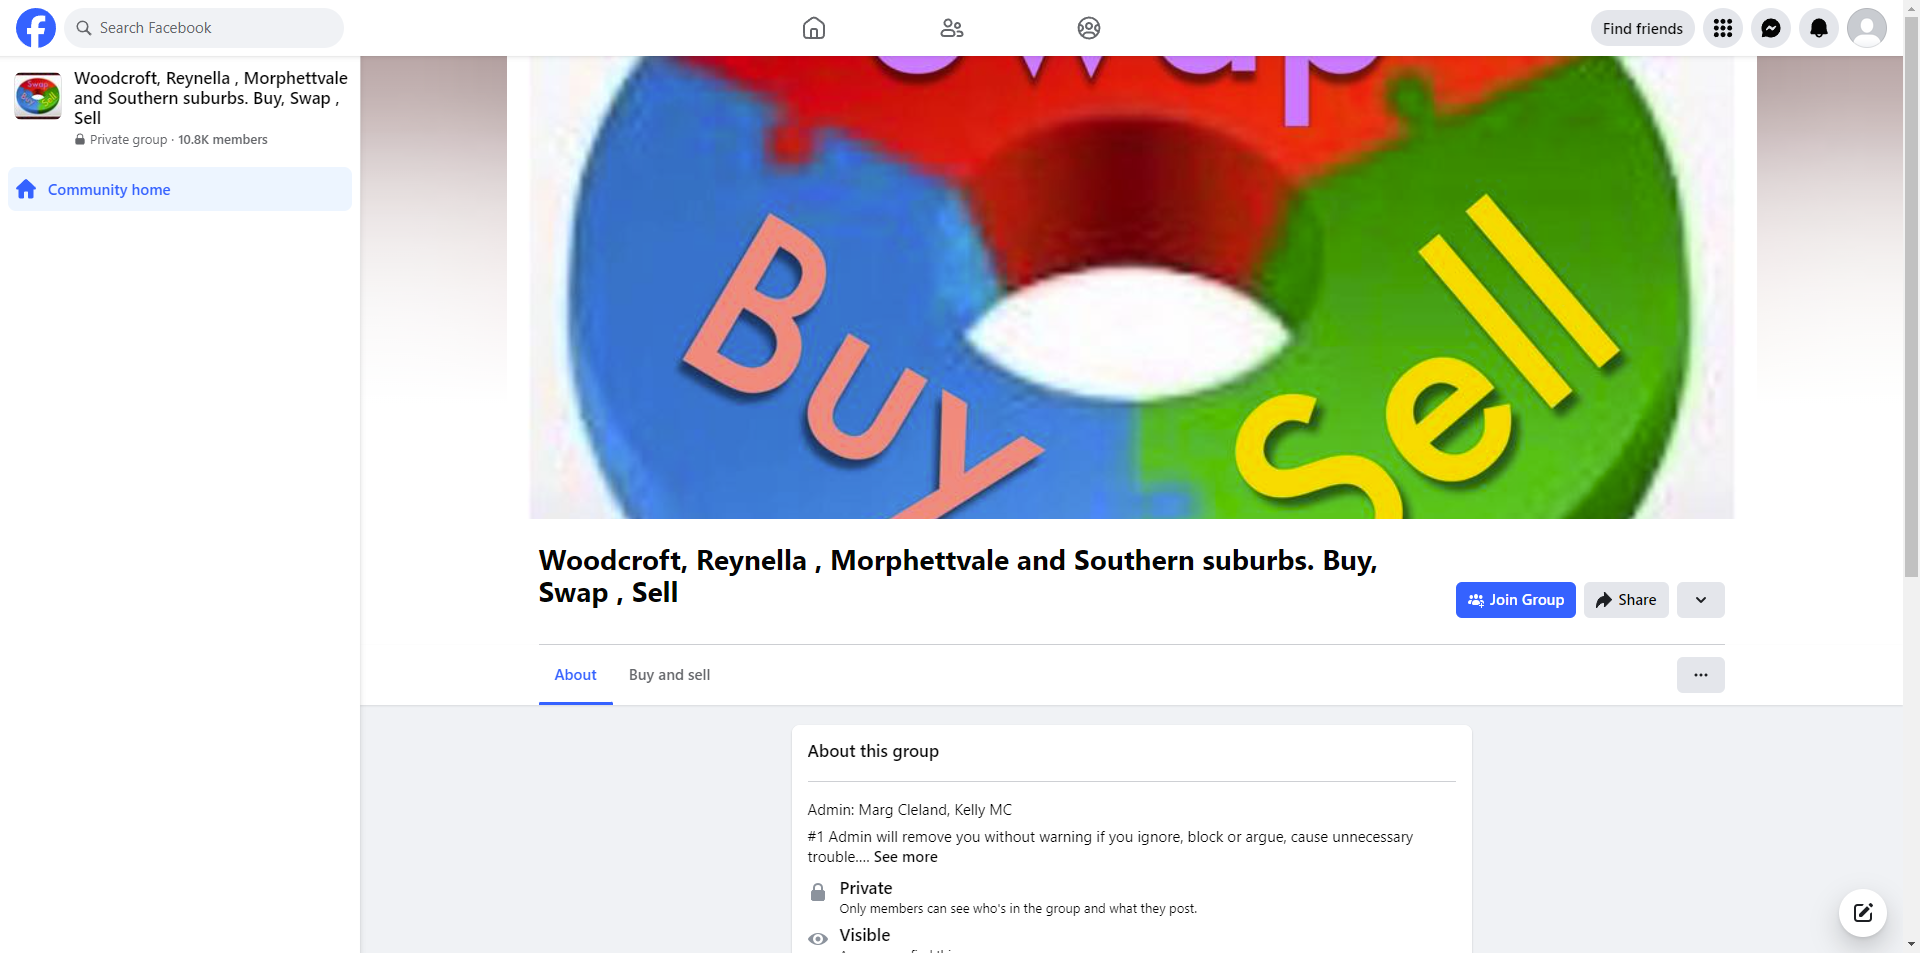 Woodcroft, Reynella, Morphett Vale and Souther Suburbs Buy, Swap, Sell